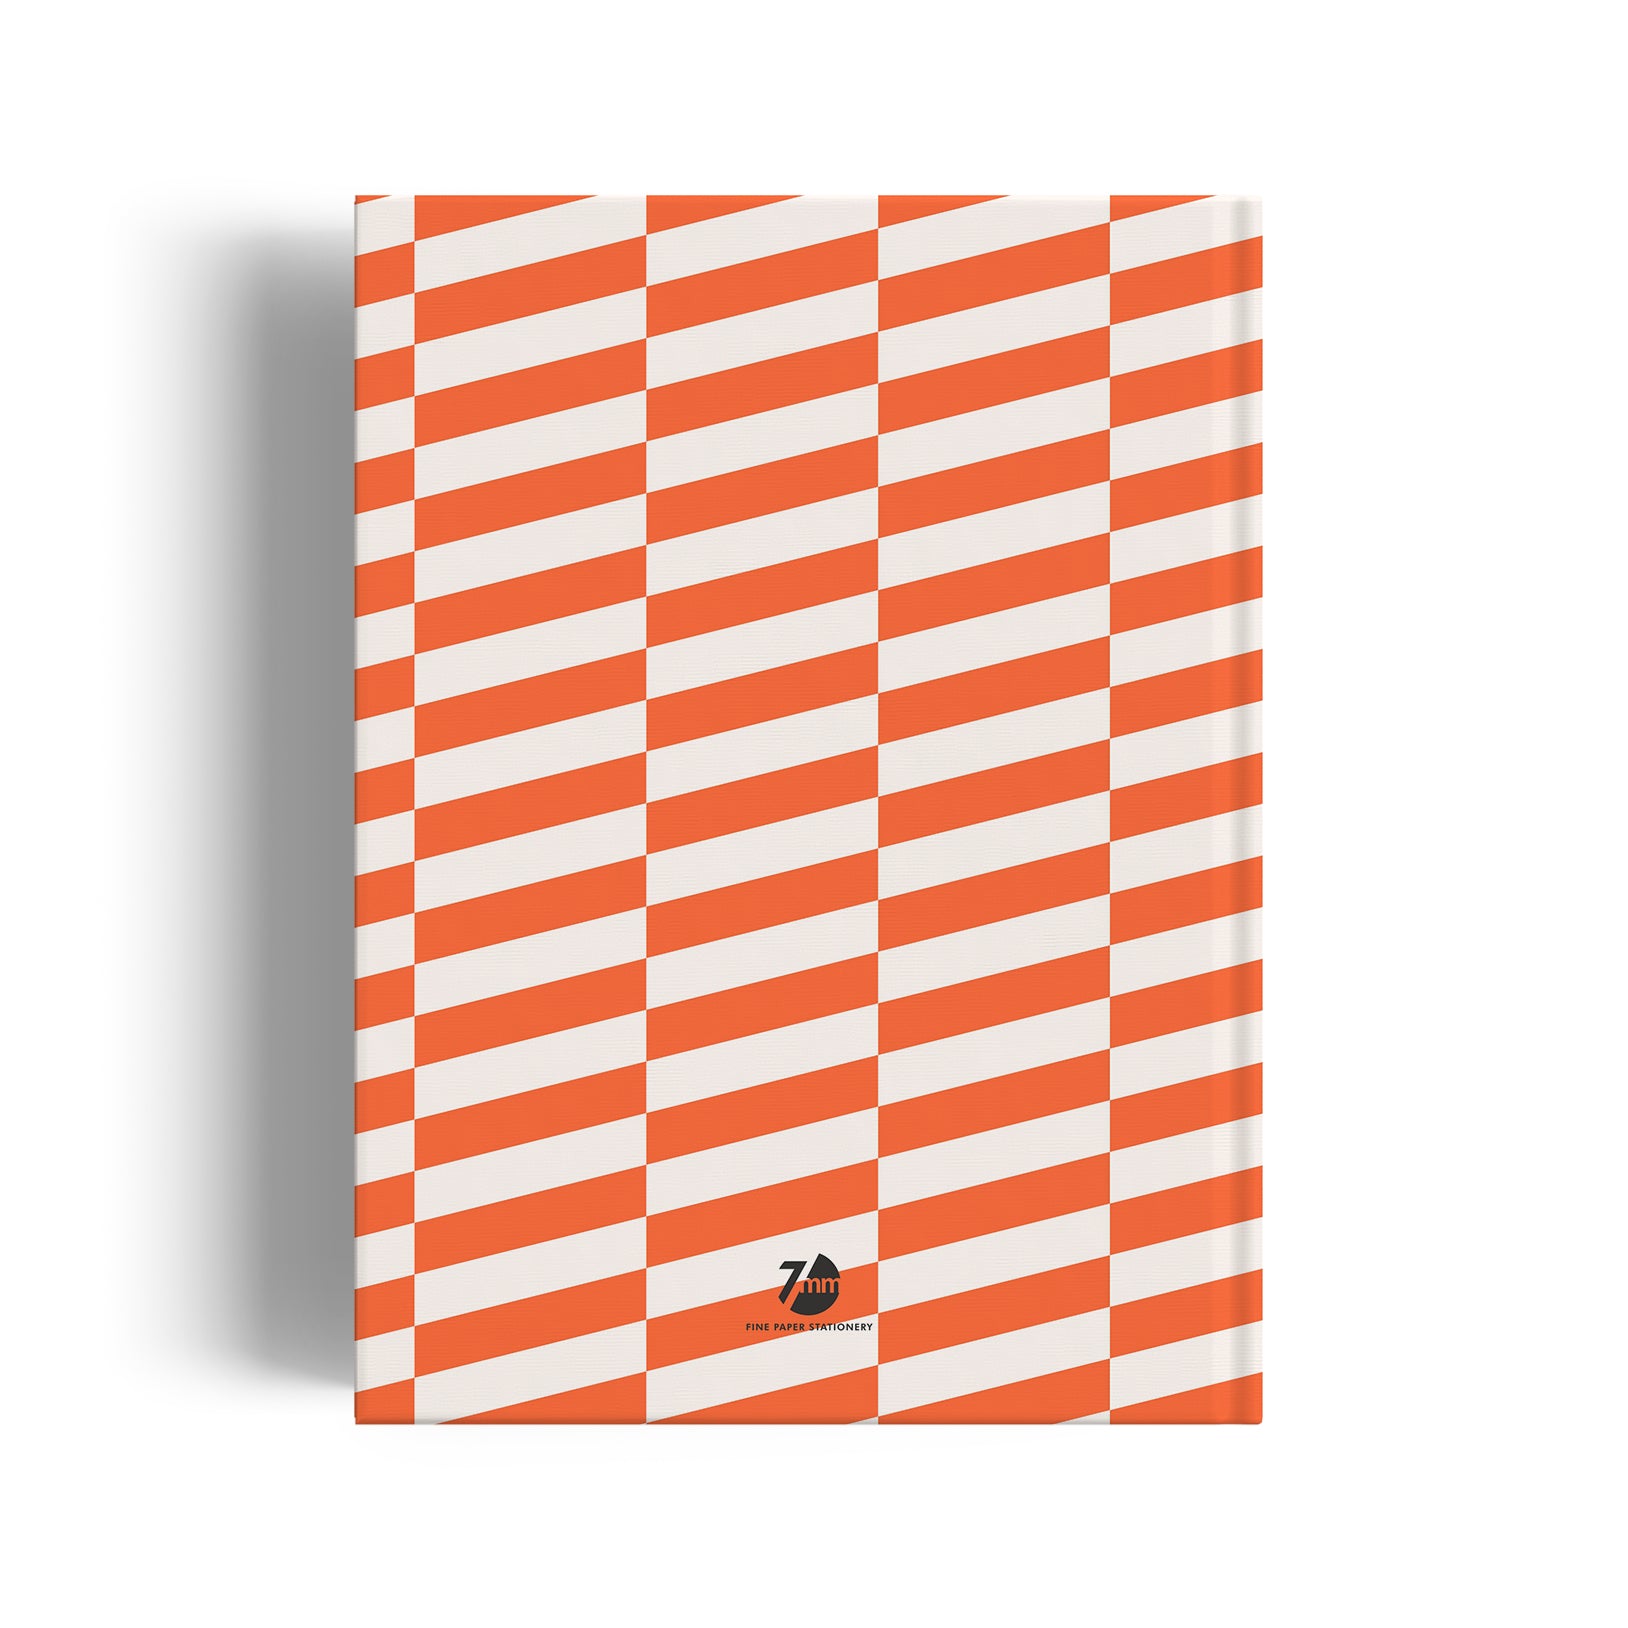 7mm A5 sized notebooks are available in ruled &amp; dot grid which can be personalized.